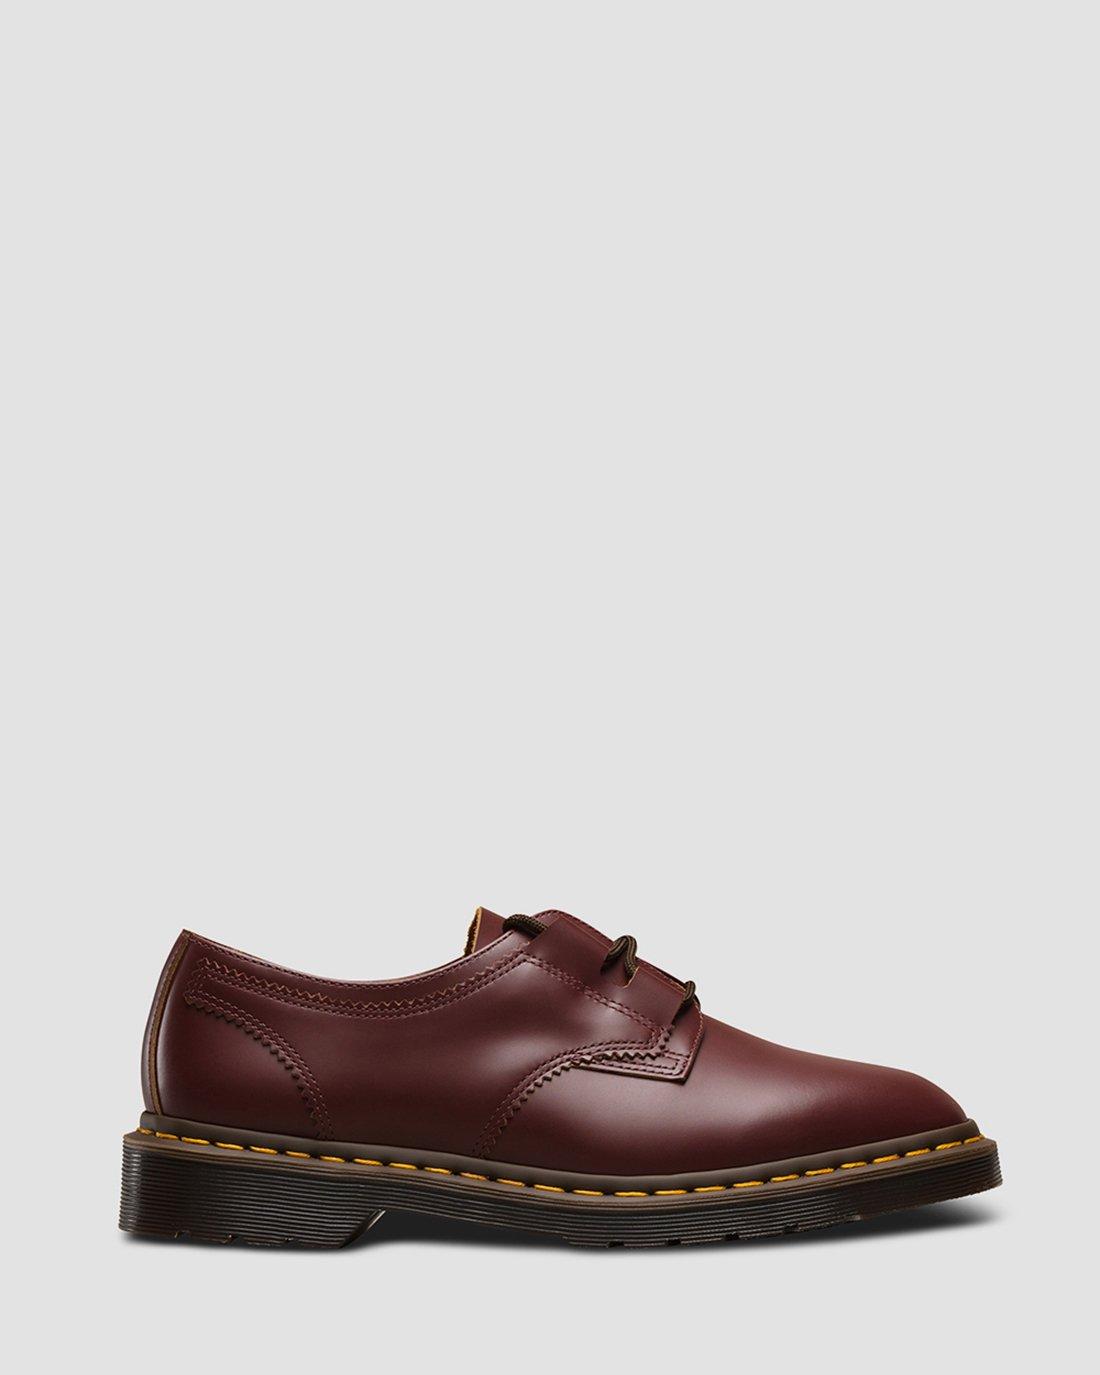 1461 GHILLIE LEATHER SHOES Dr. Martens